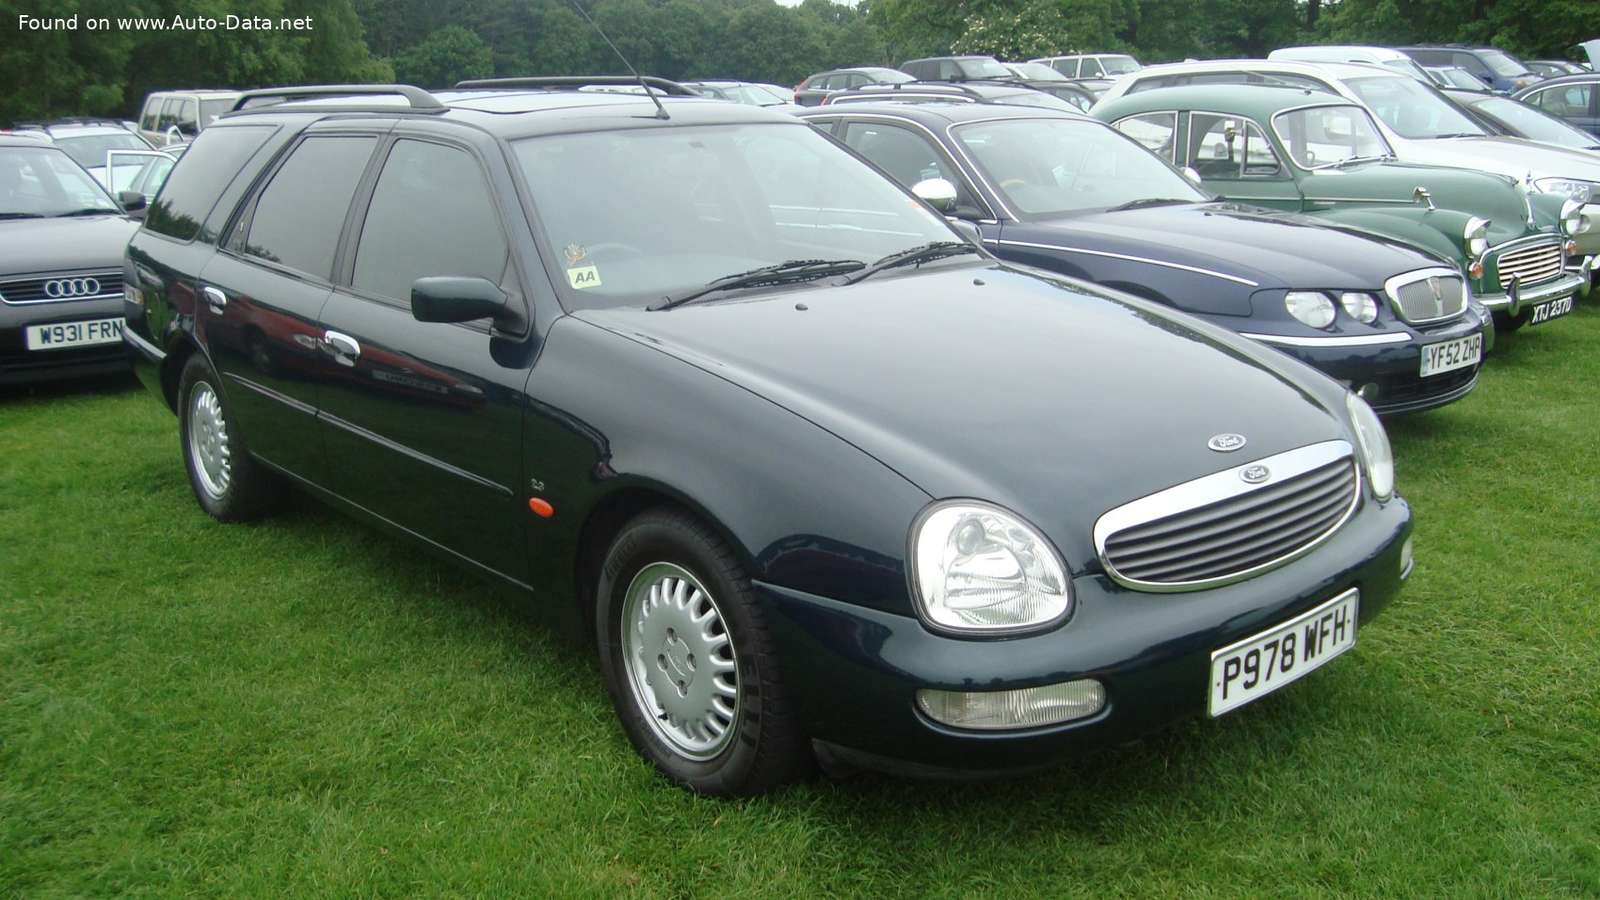 Ford-Scorpio II station wagon puzzle online